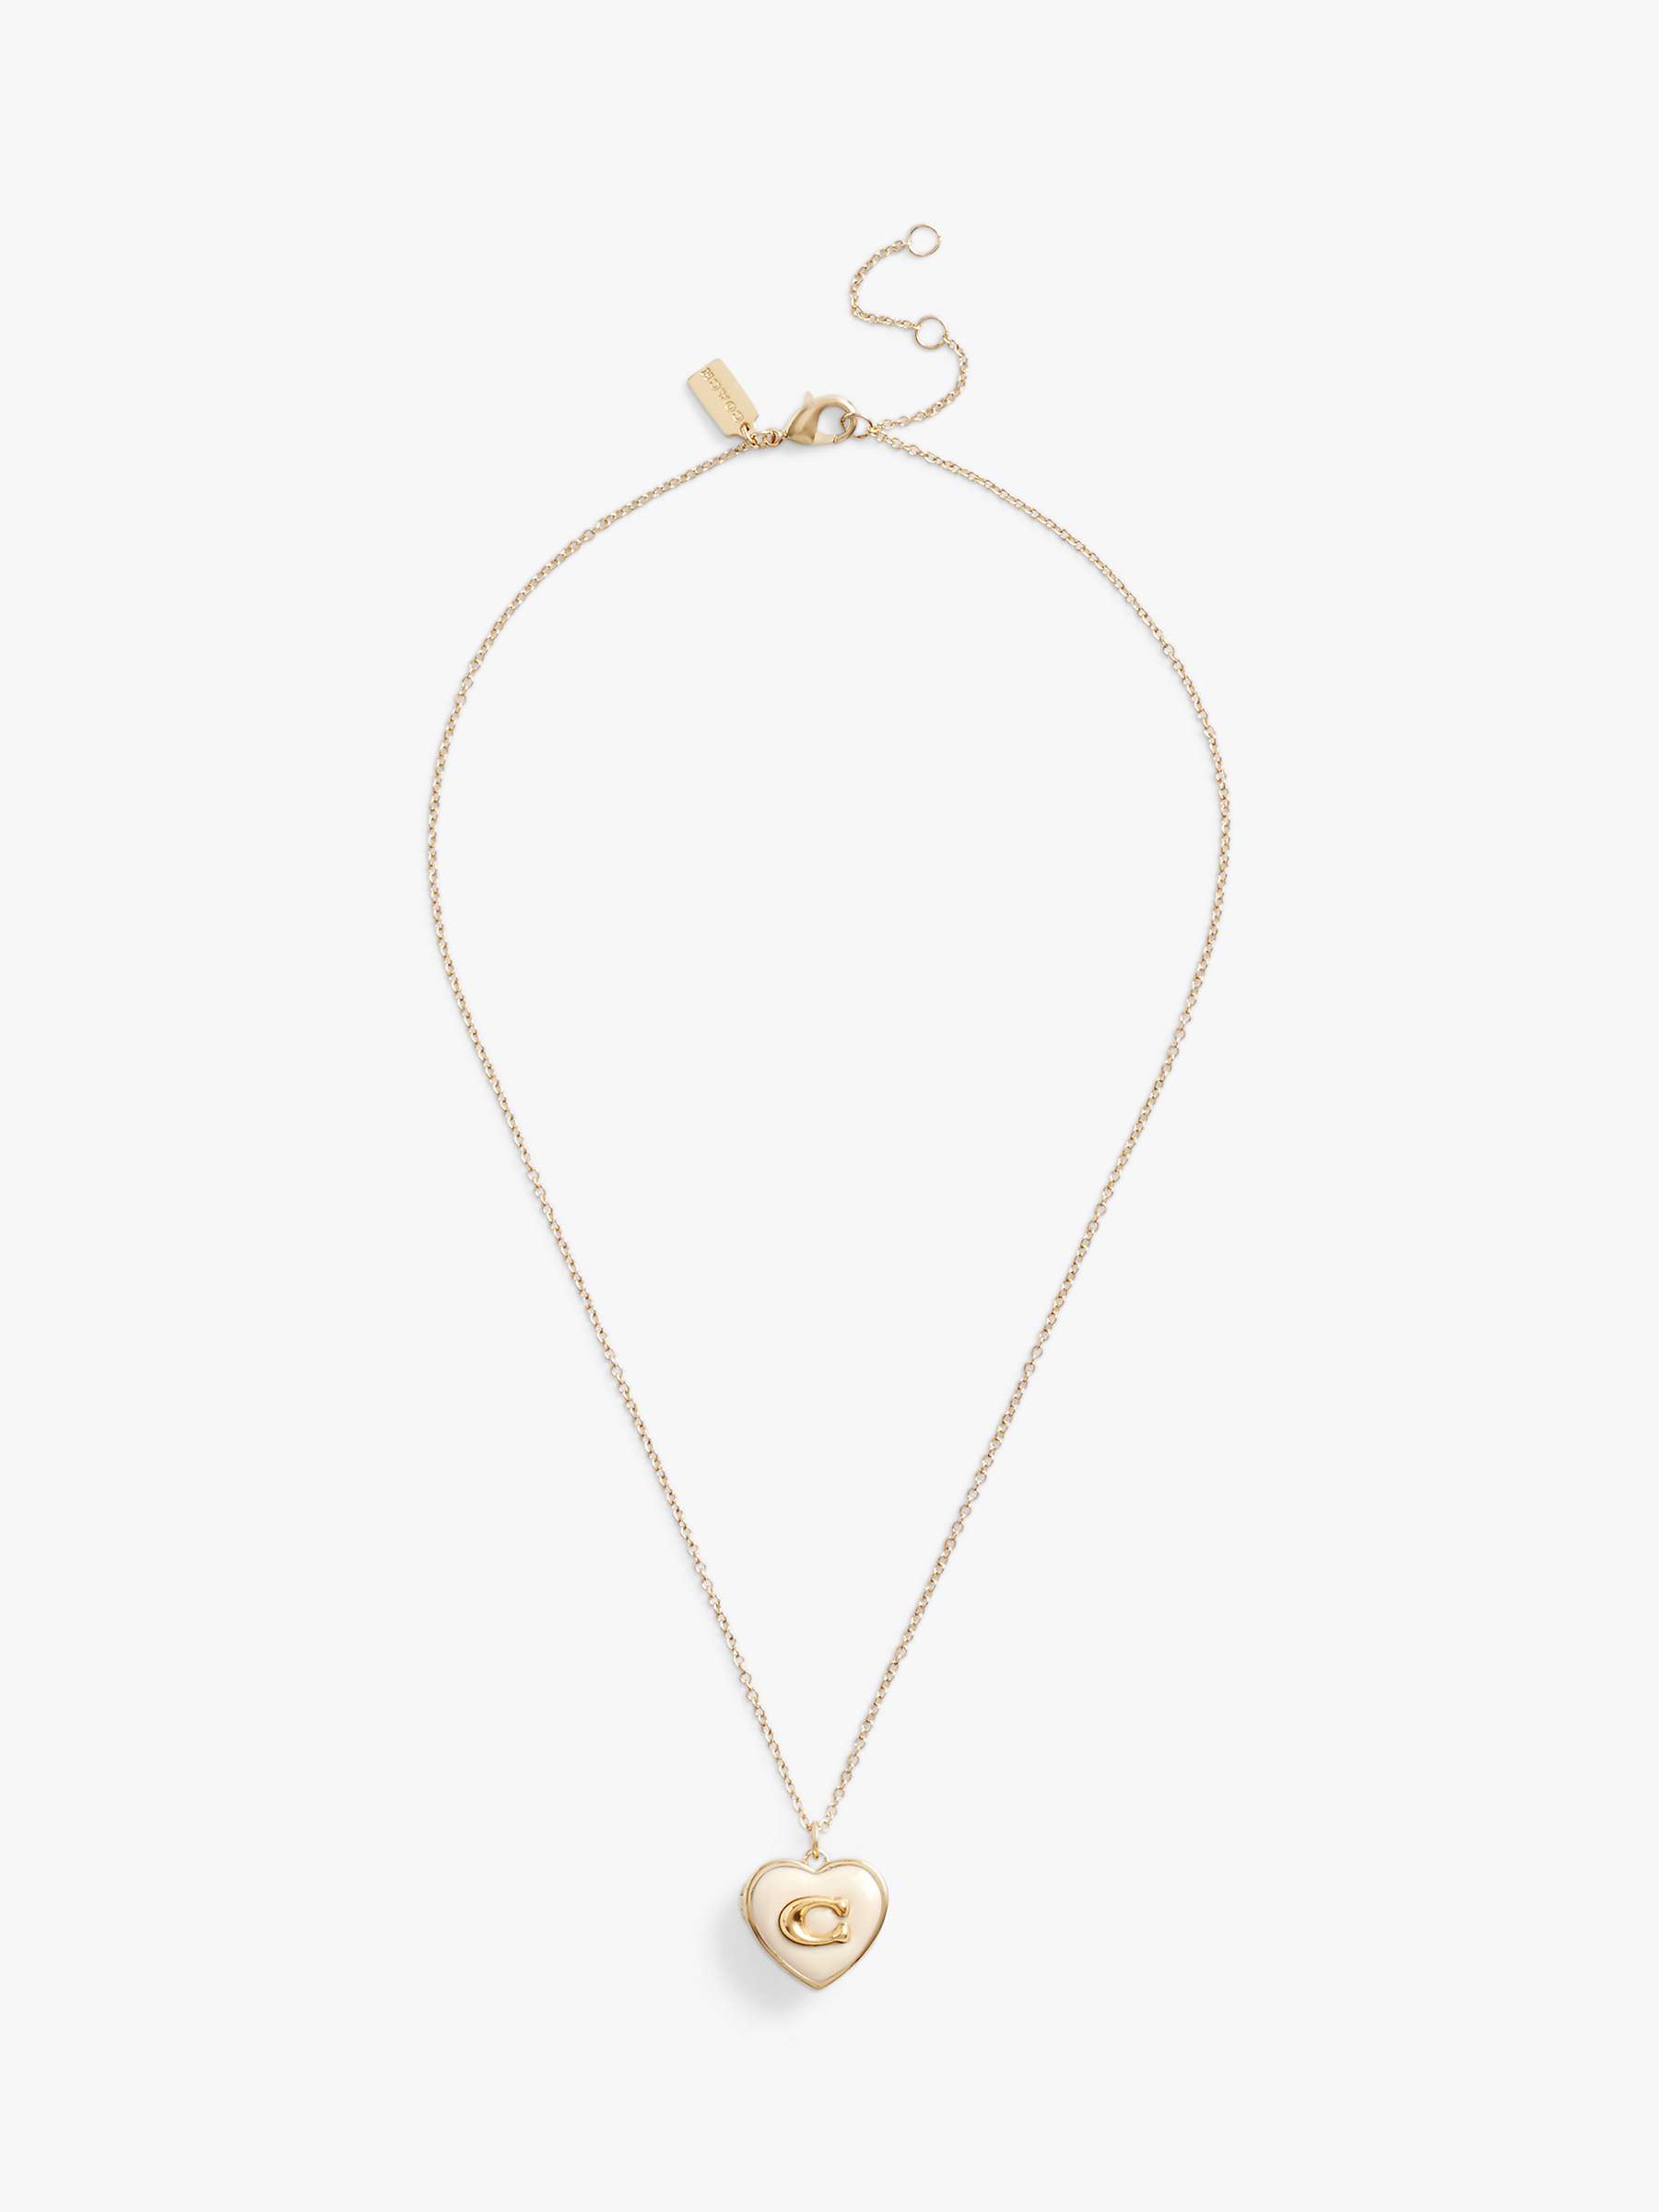 Buy Coach Enamel and Crystal Heart Locket Necklace Online at johnlewis.com